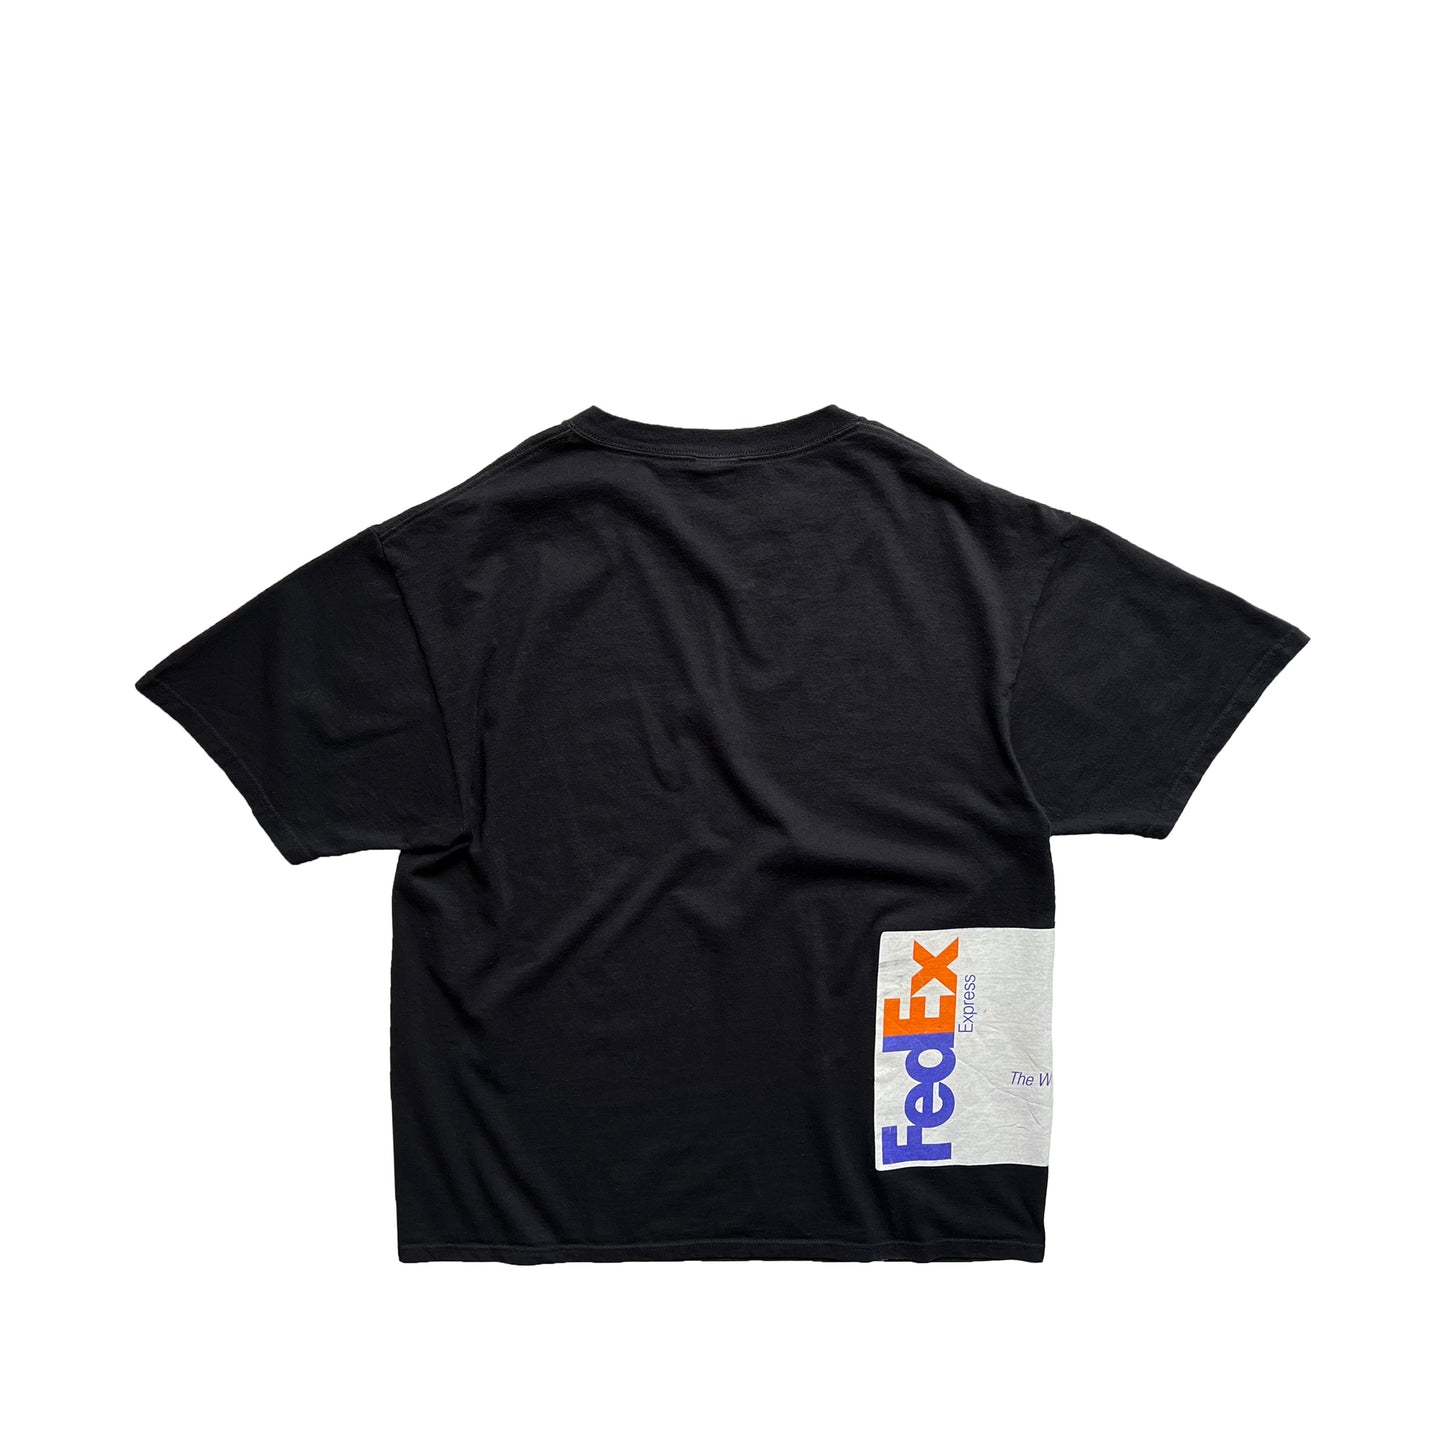 00's OfficeMax AD T-SHIRT